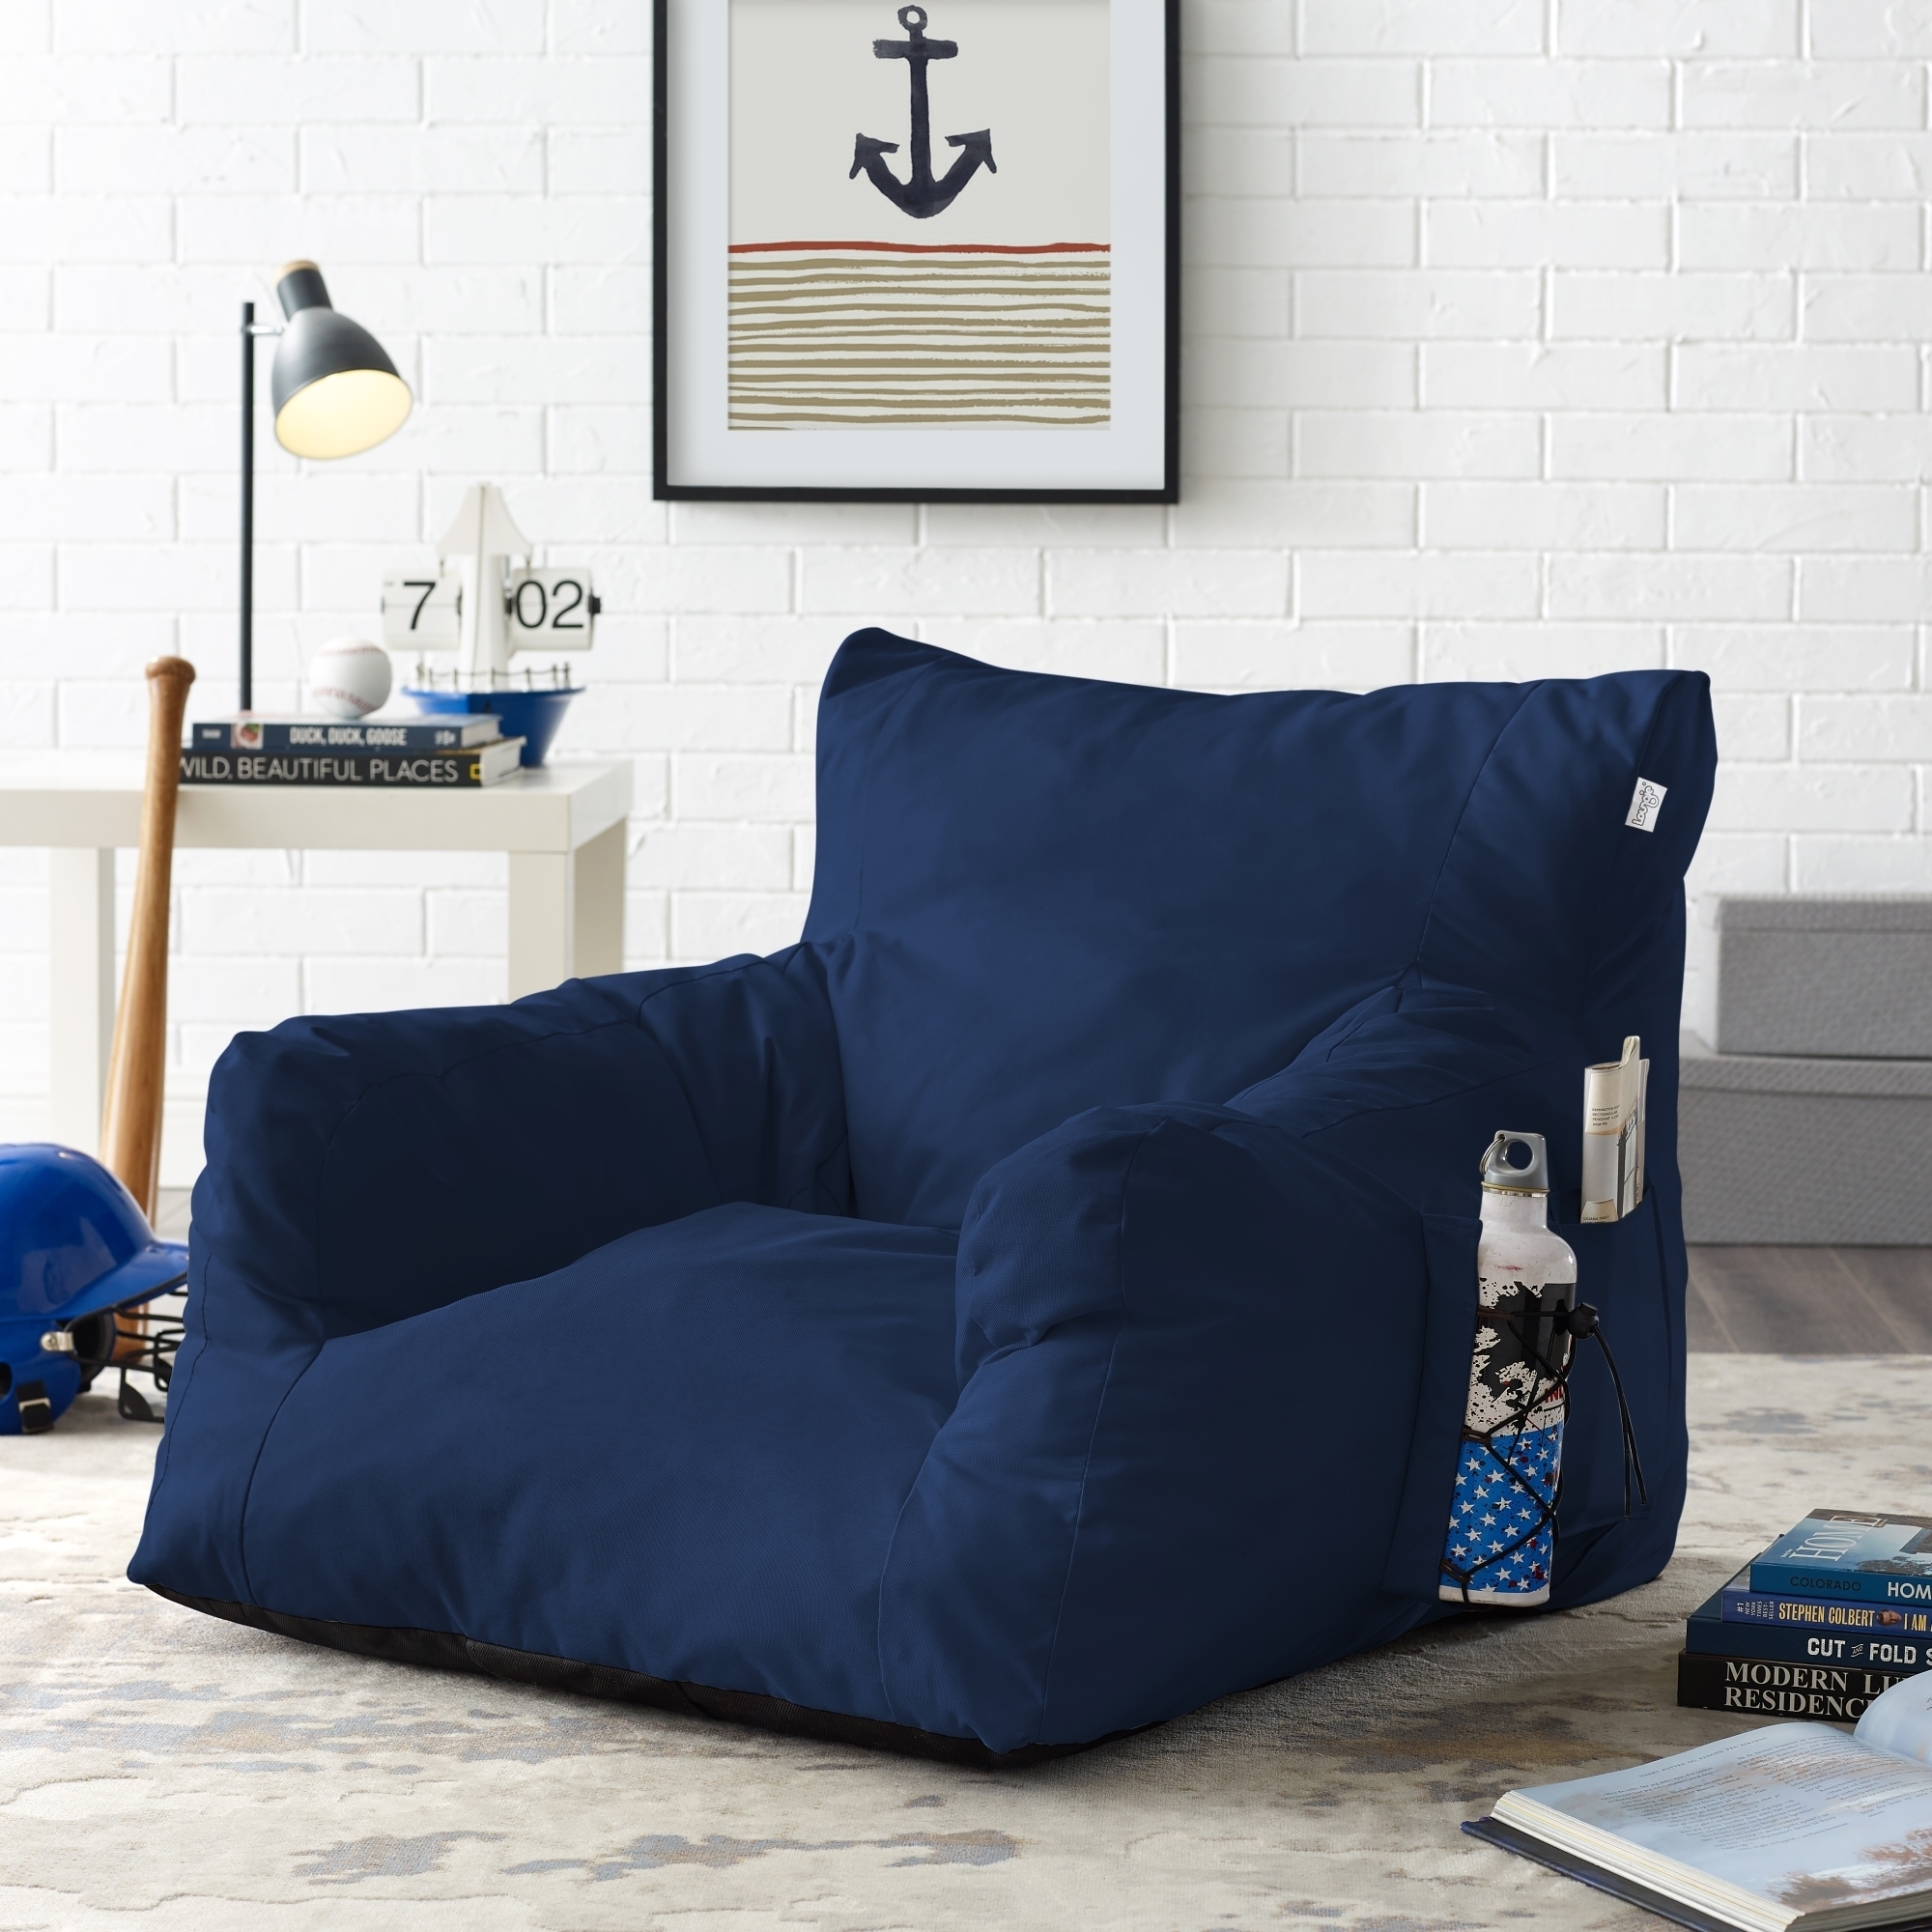 Loungie Comfy Foam Lounge Chair-Nylon Bean Bag-Indoor- Outdoor-Self Expanding-Water Resistant - Navy - navy blue